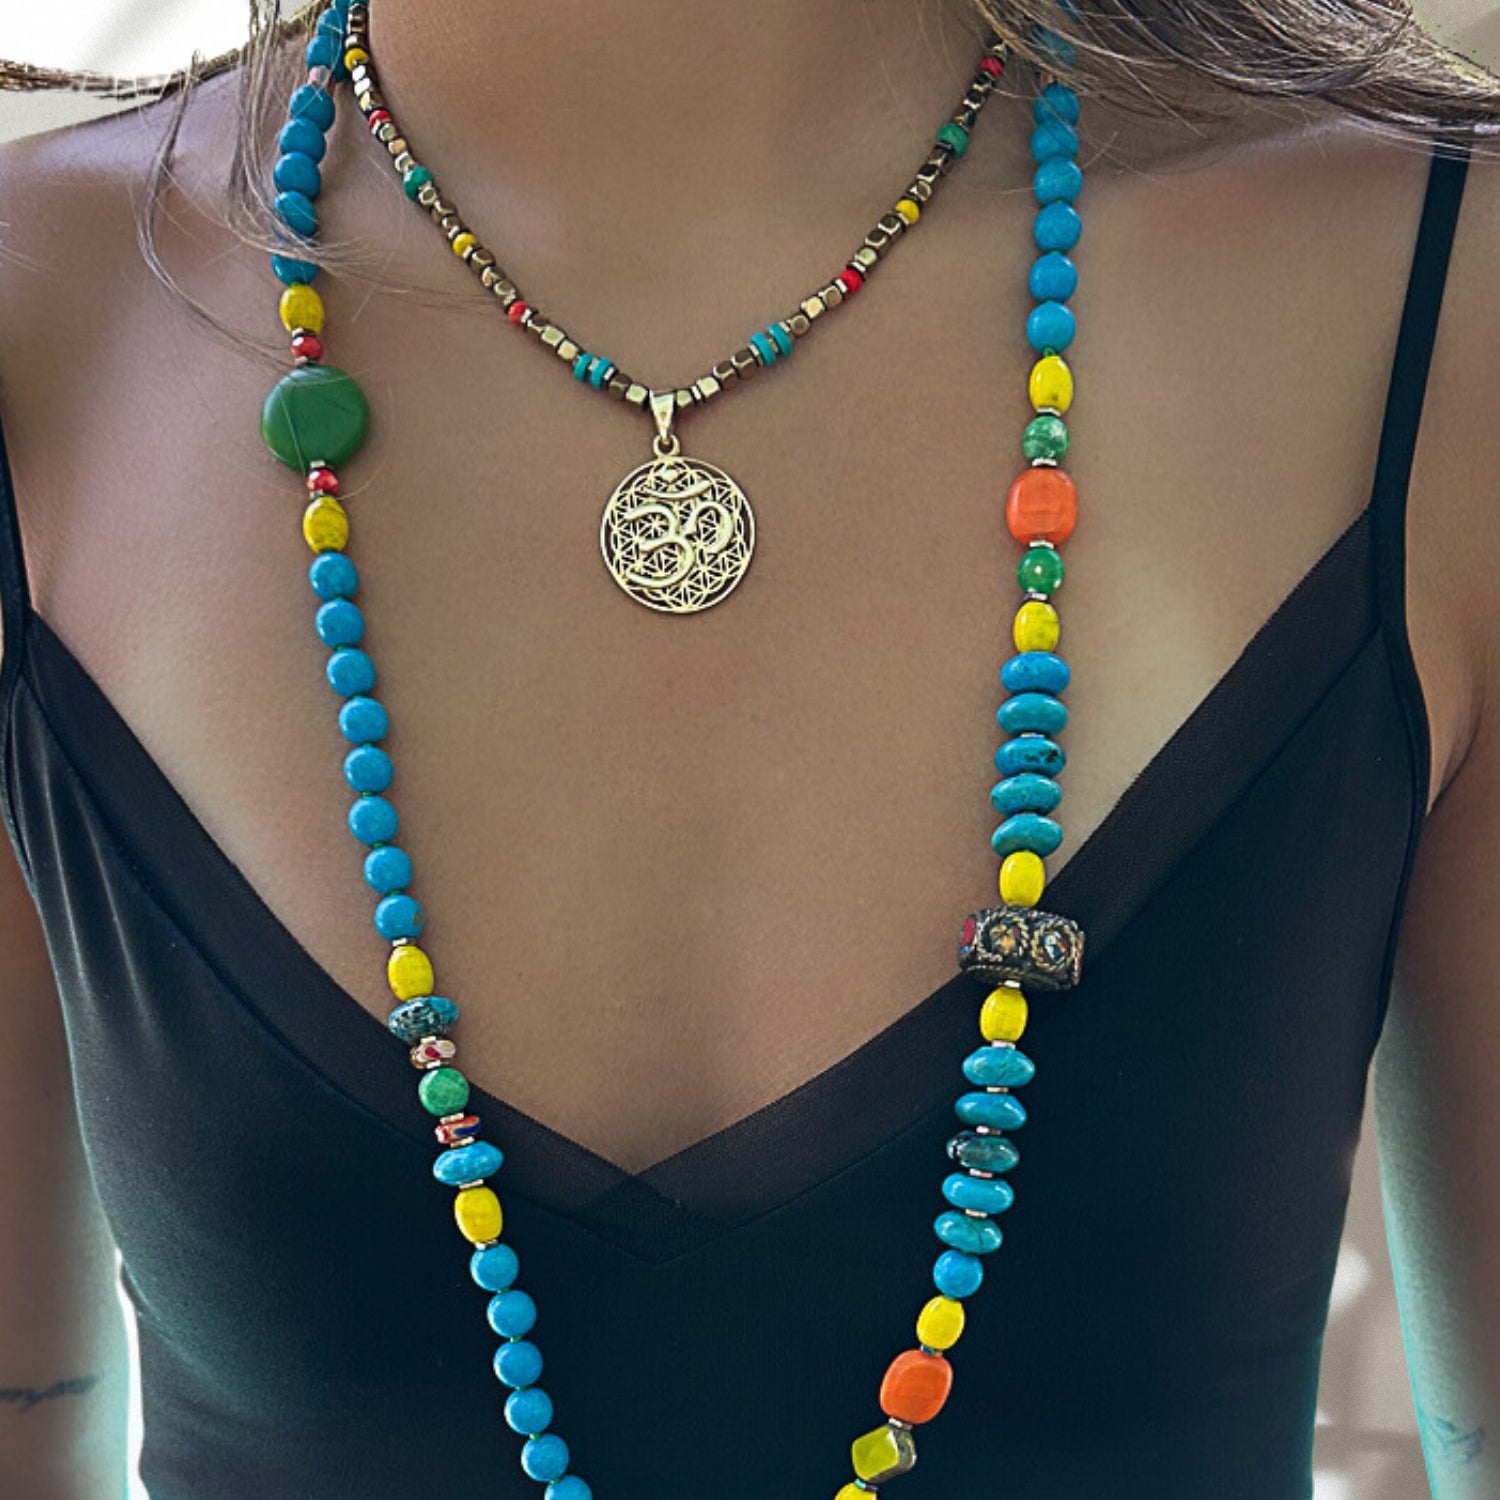 Model wearing the Breathe Om Gold Necklace, radiating serenity and embracing the spiritual connection it represents.